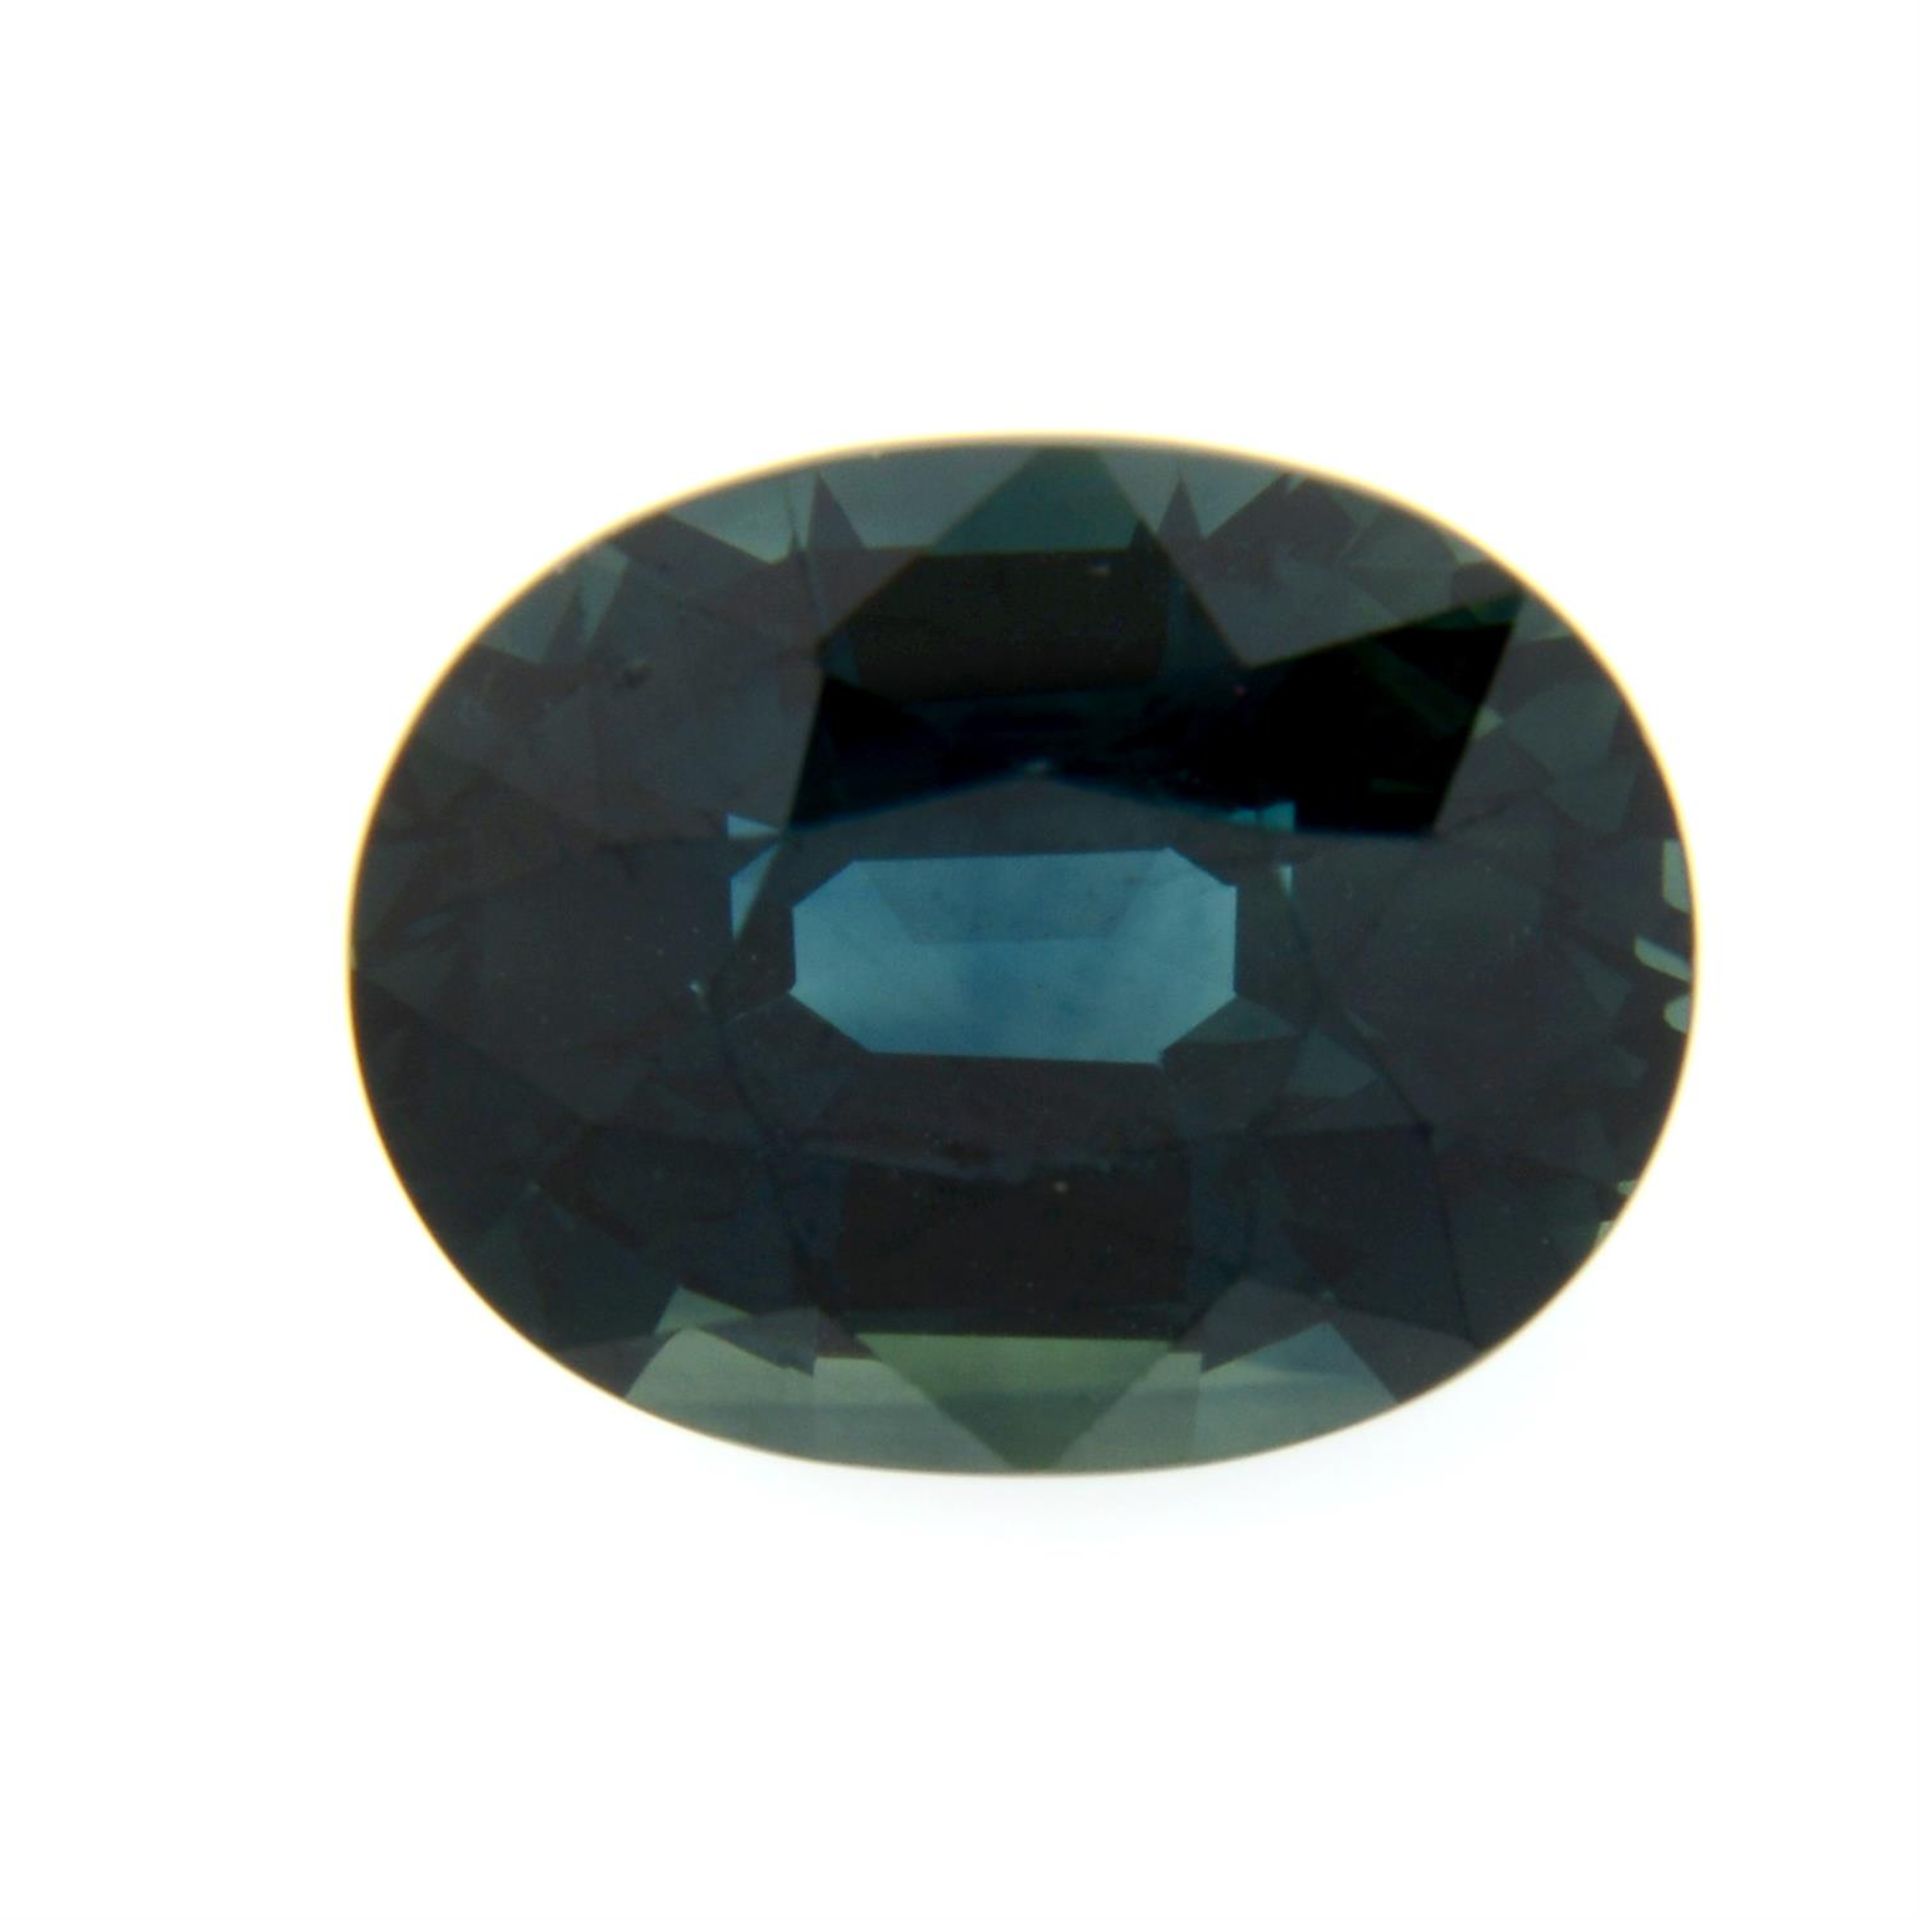 An oval shape sapphire, weighing 5.04ct